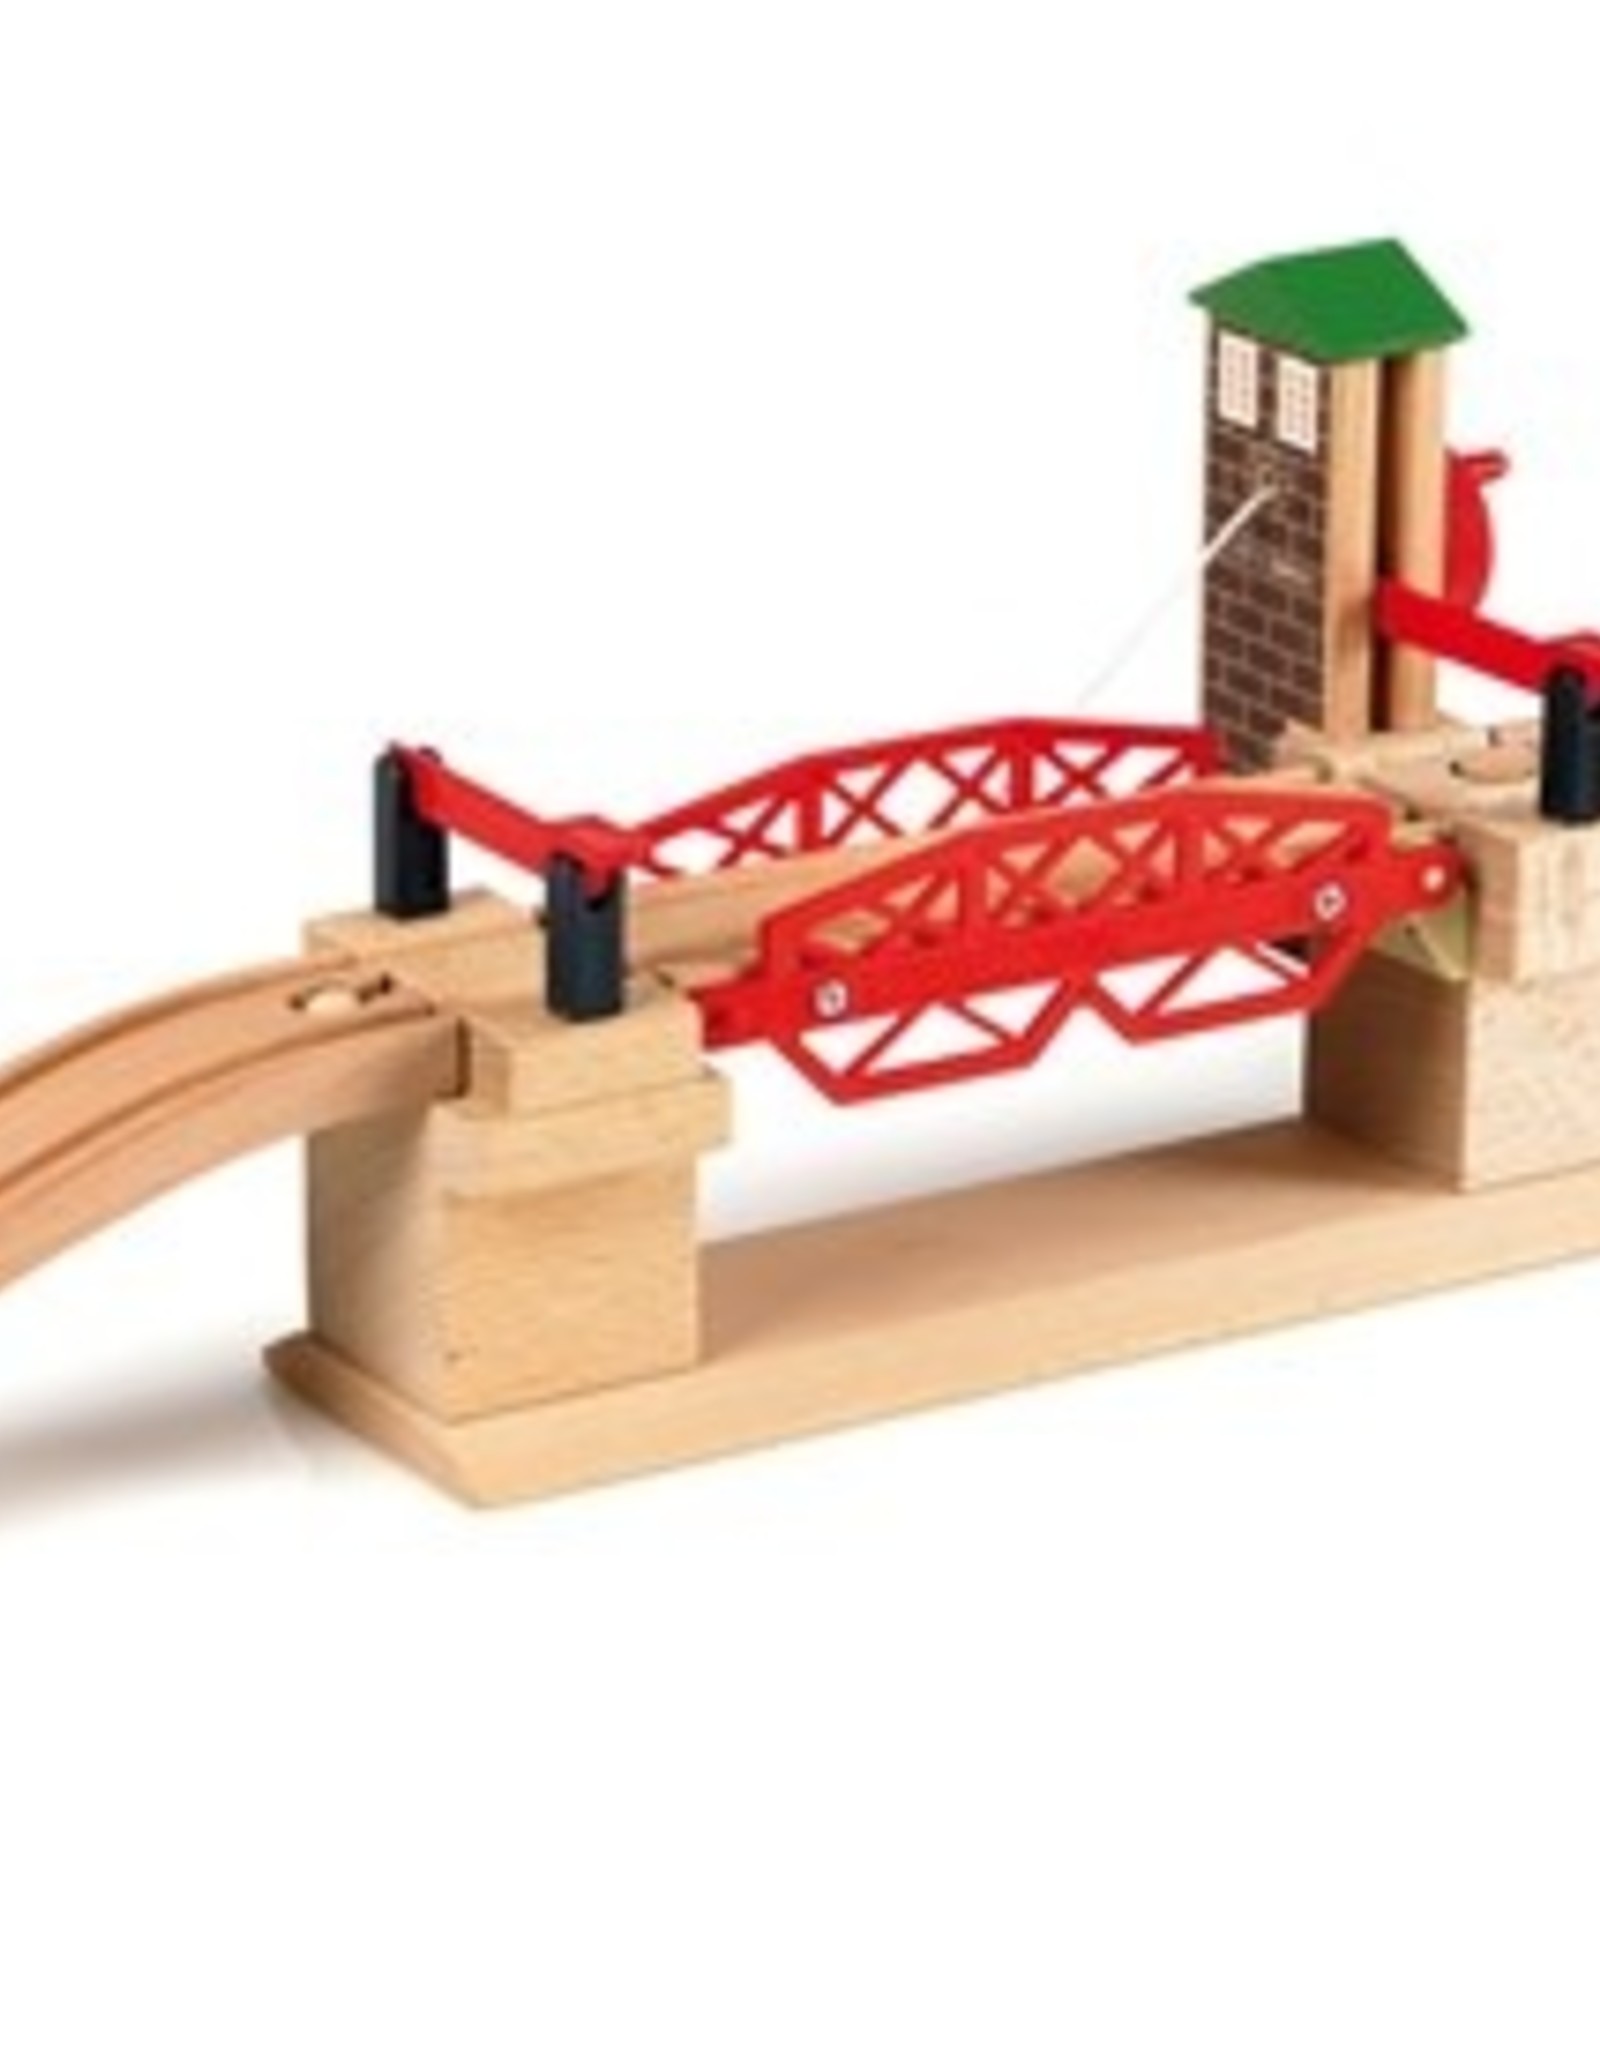 Ravensburger BRIO My First Railway Battery Operated Train